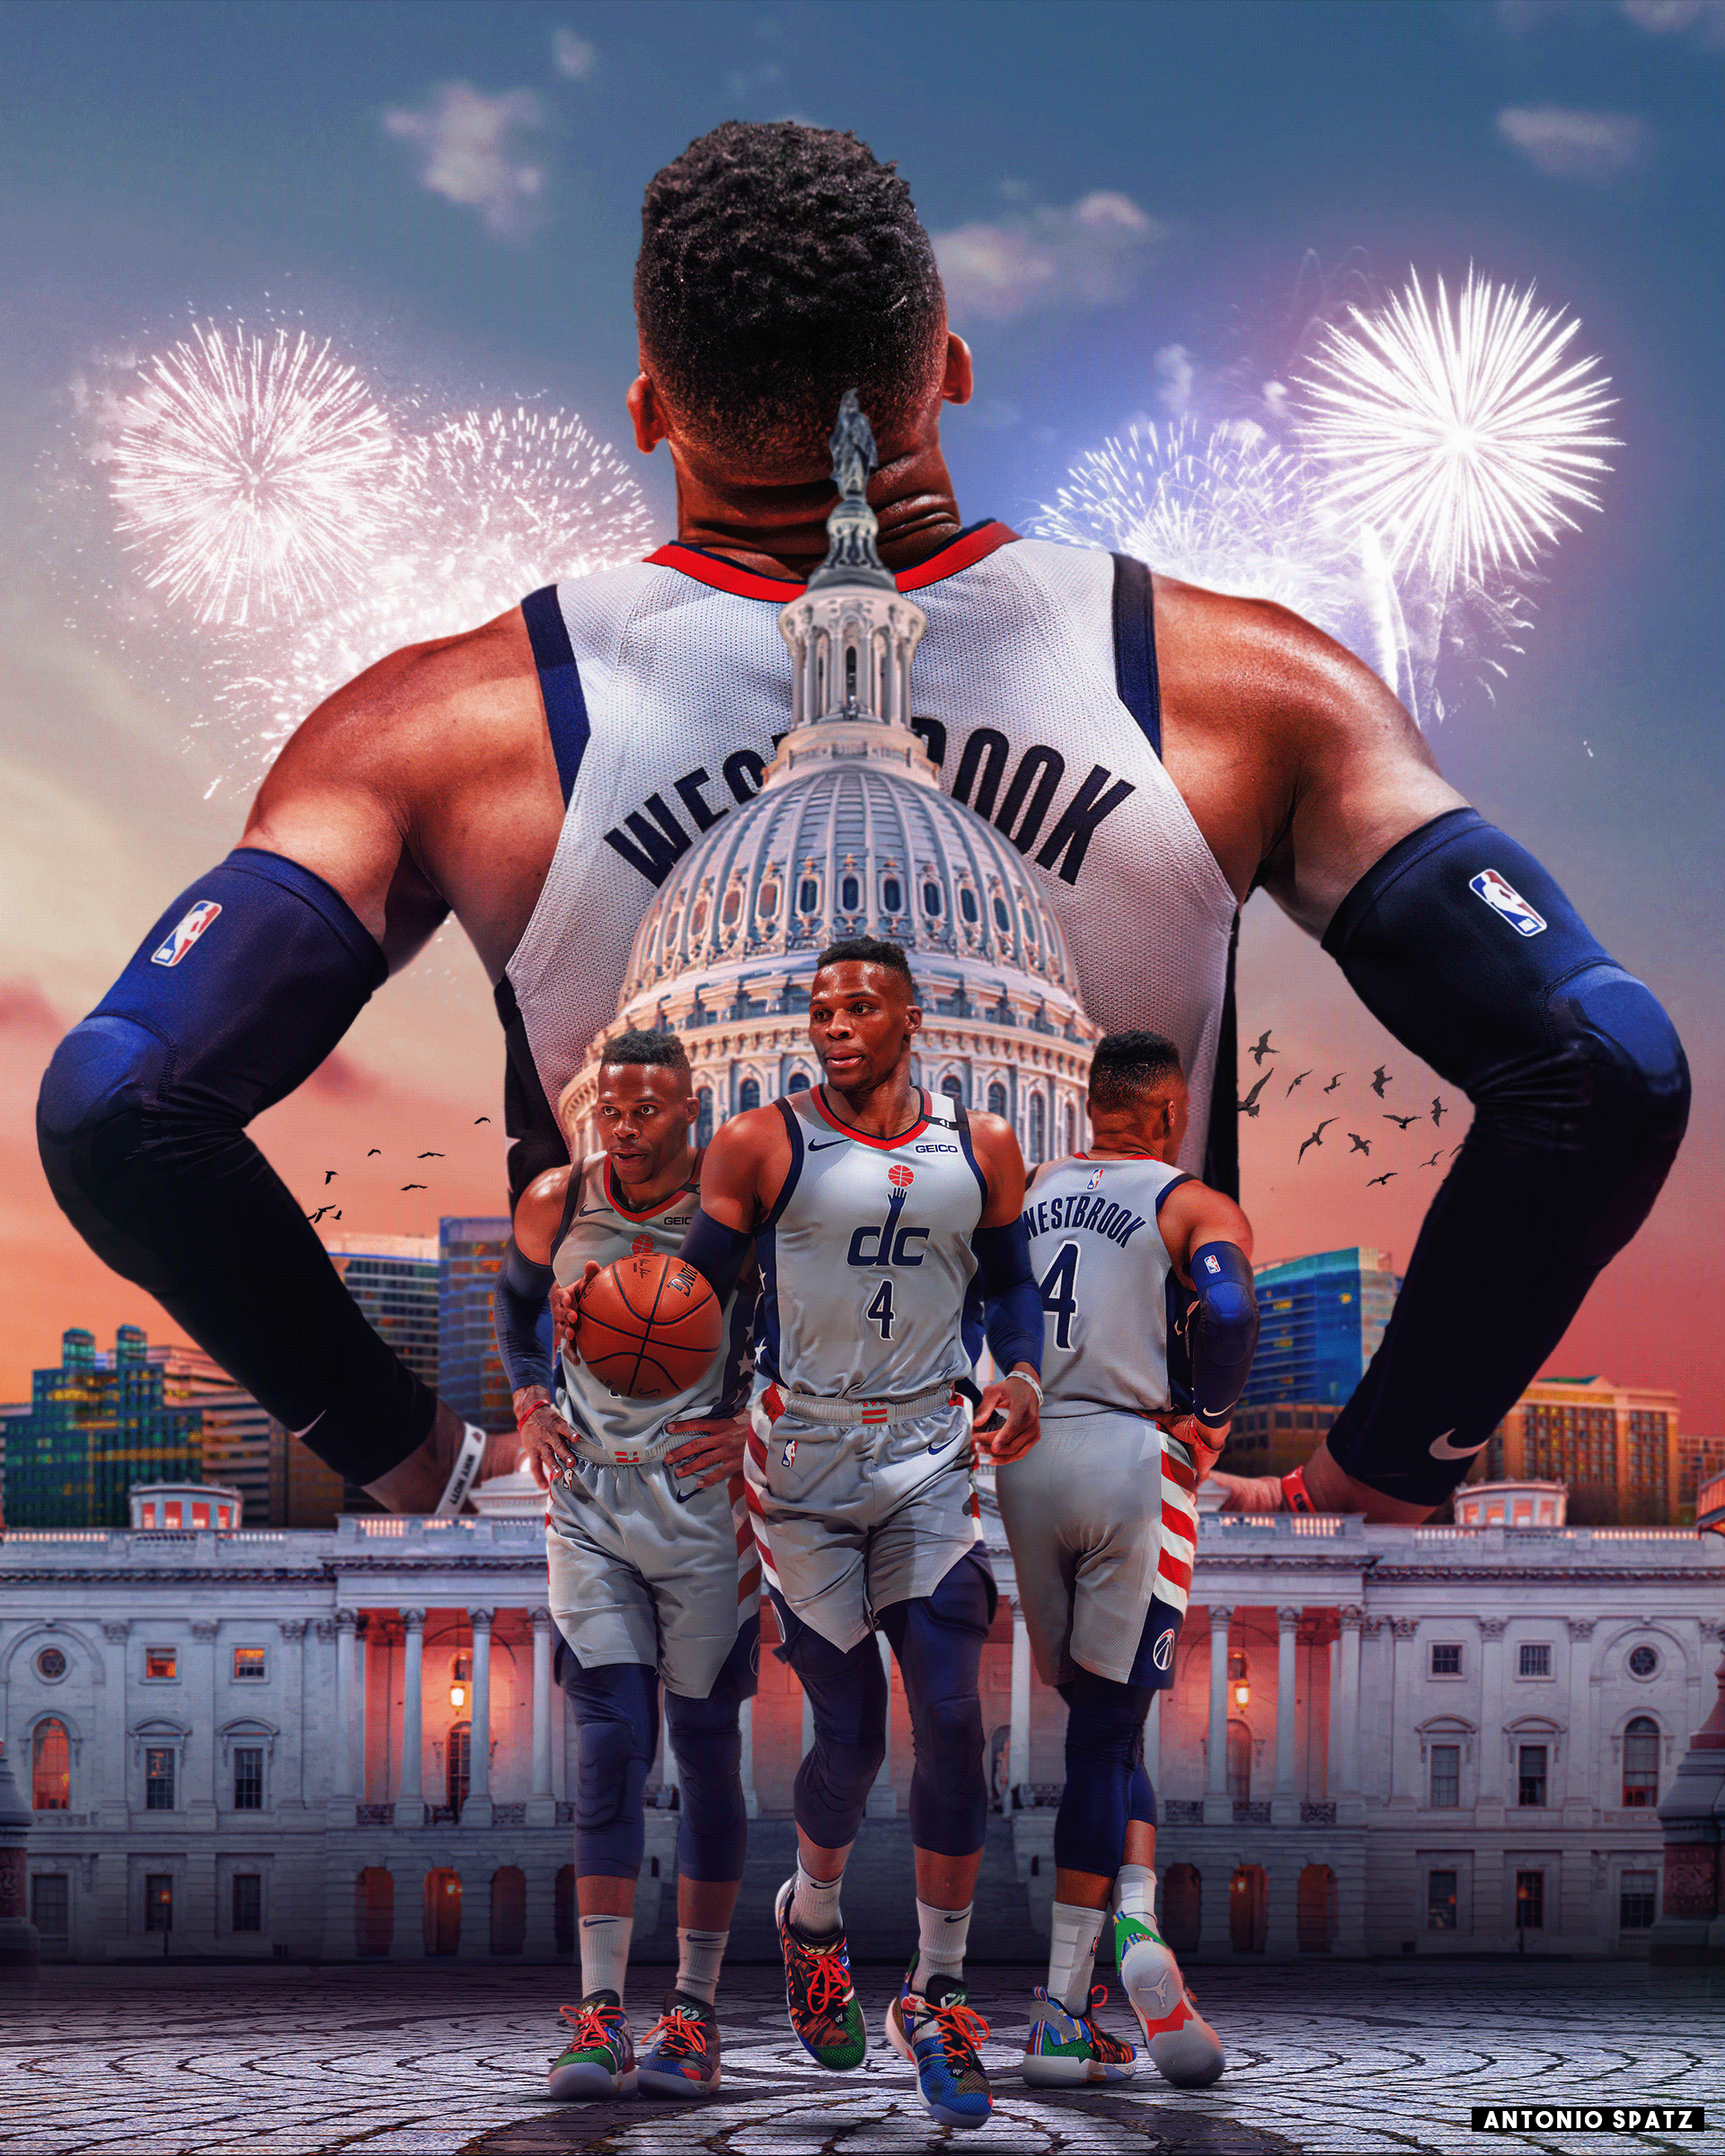 Russell Westbrook wallpaper for this - Washington Wizards